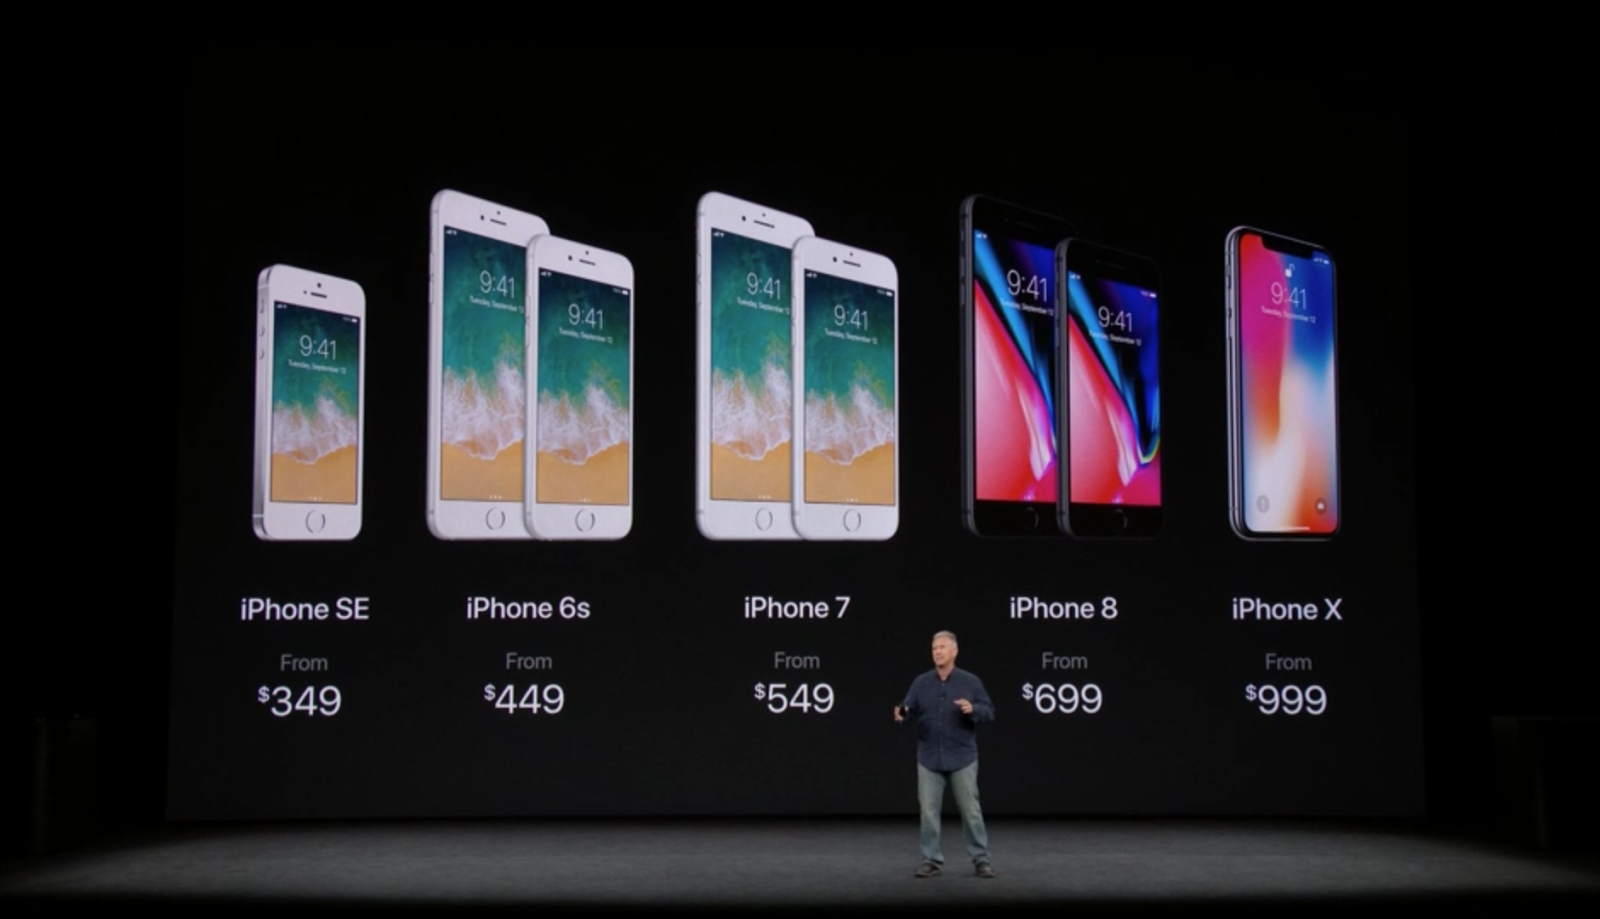 thatgeekdad iPhone comparison of all the iPhones that will be